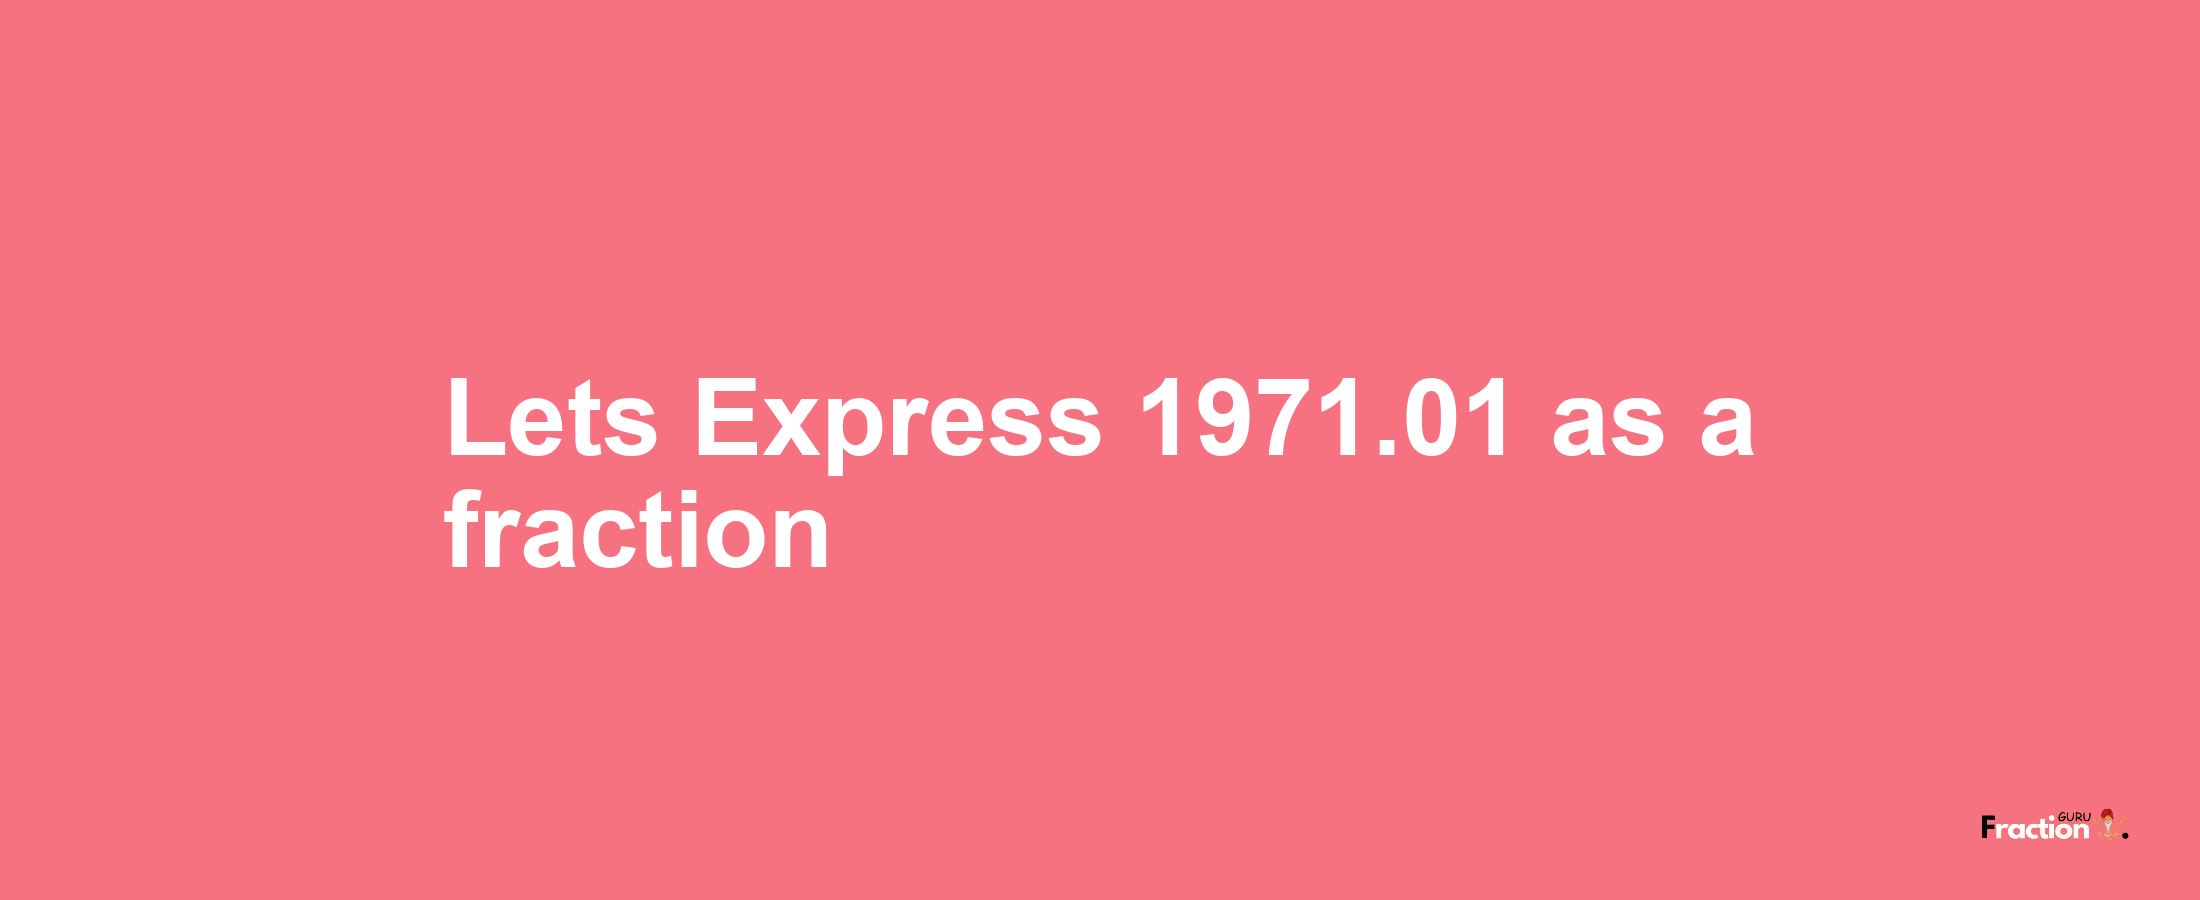 Lets Express 1971.01 as afraction